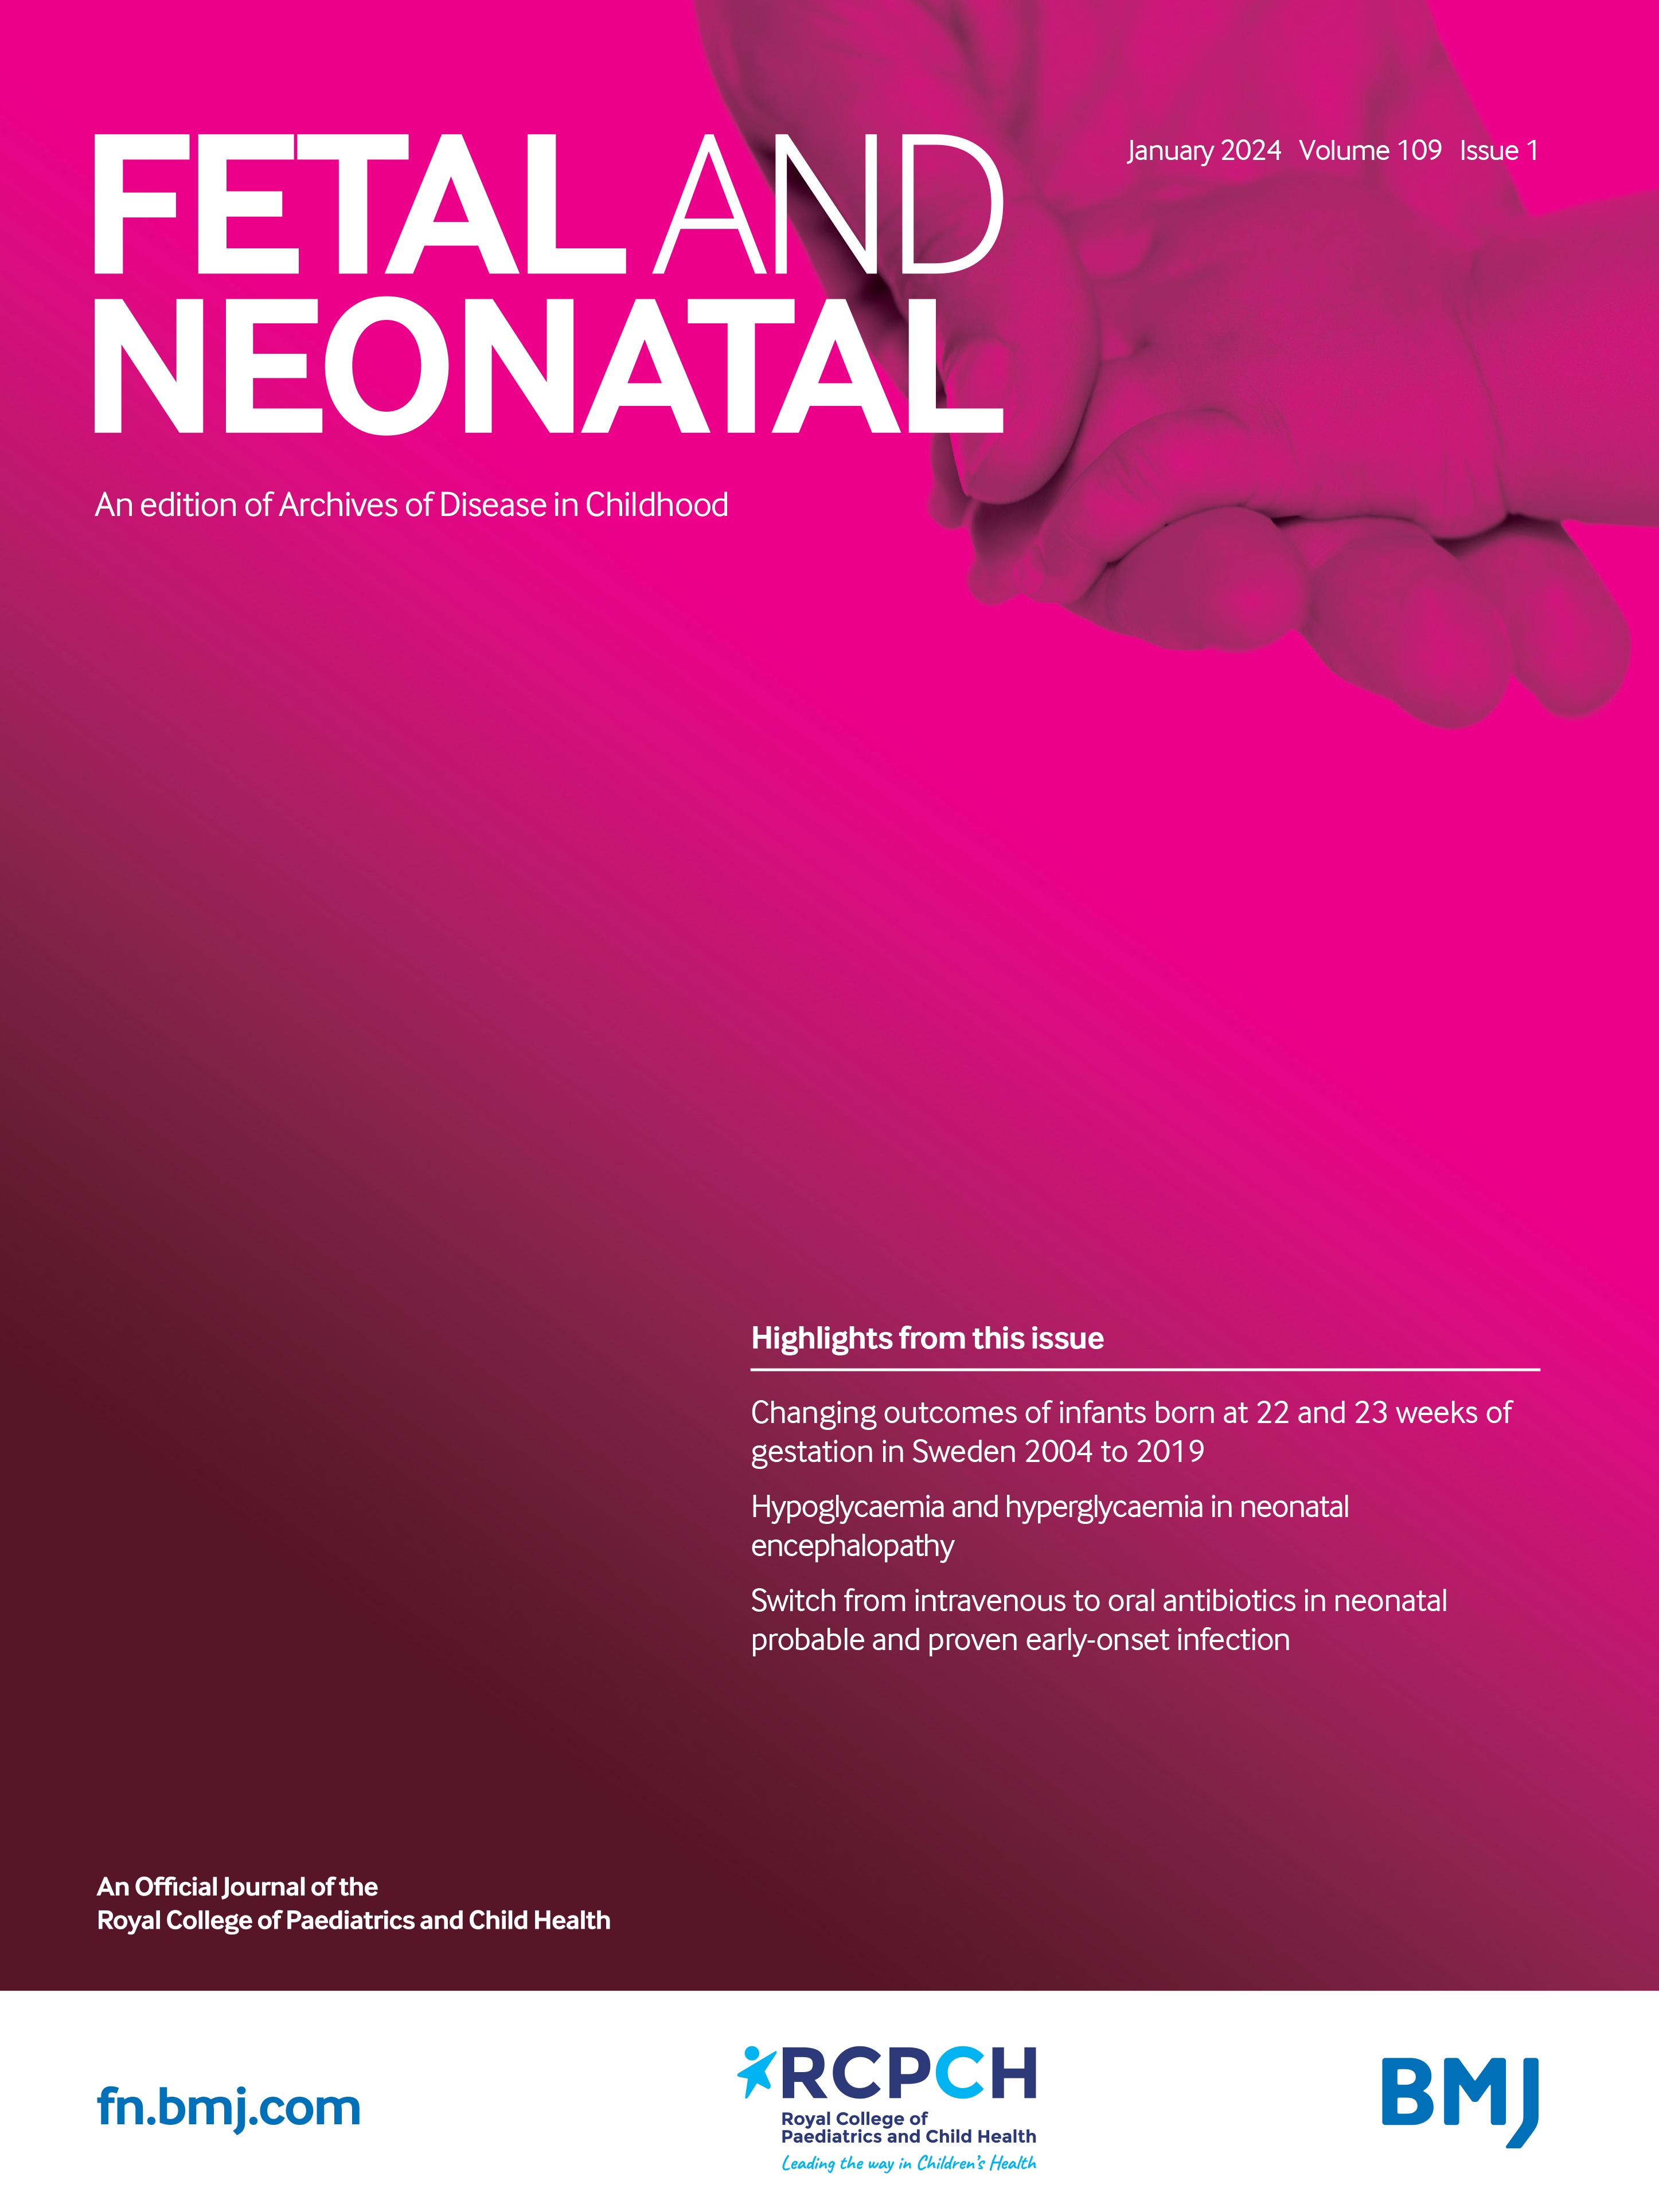 Prevalence of symptomatic tracheal morbidities after fetoscopic endoluminal tracheal occlusion: a systematic review and meta-analysis